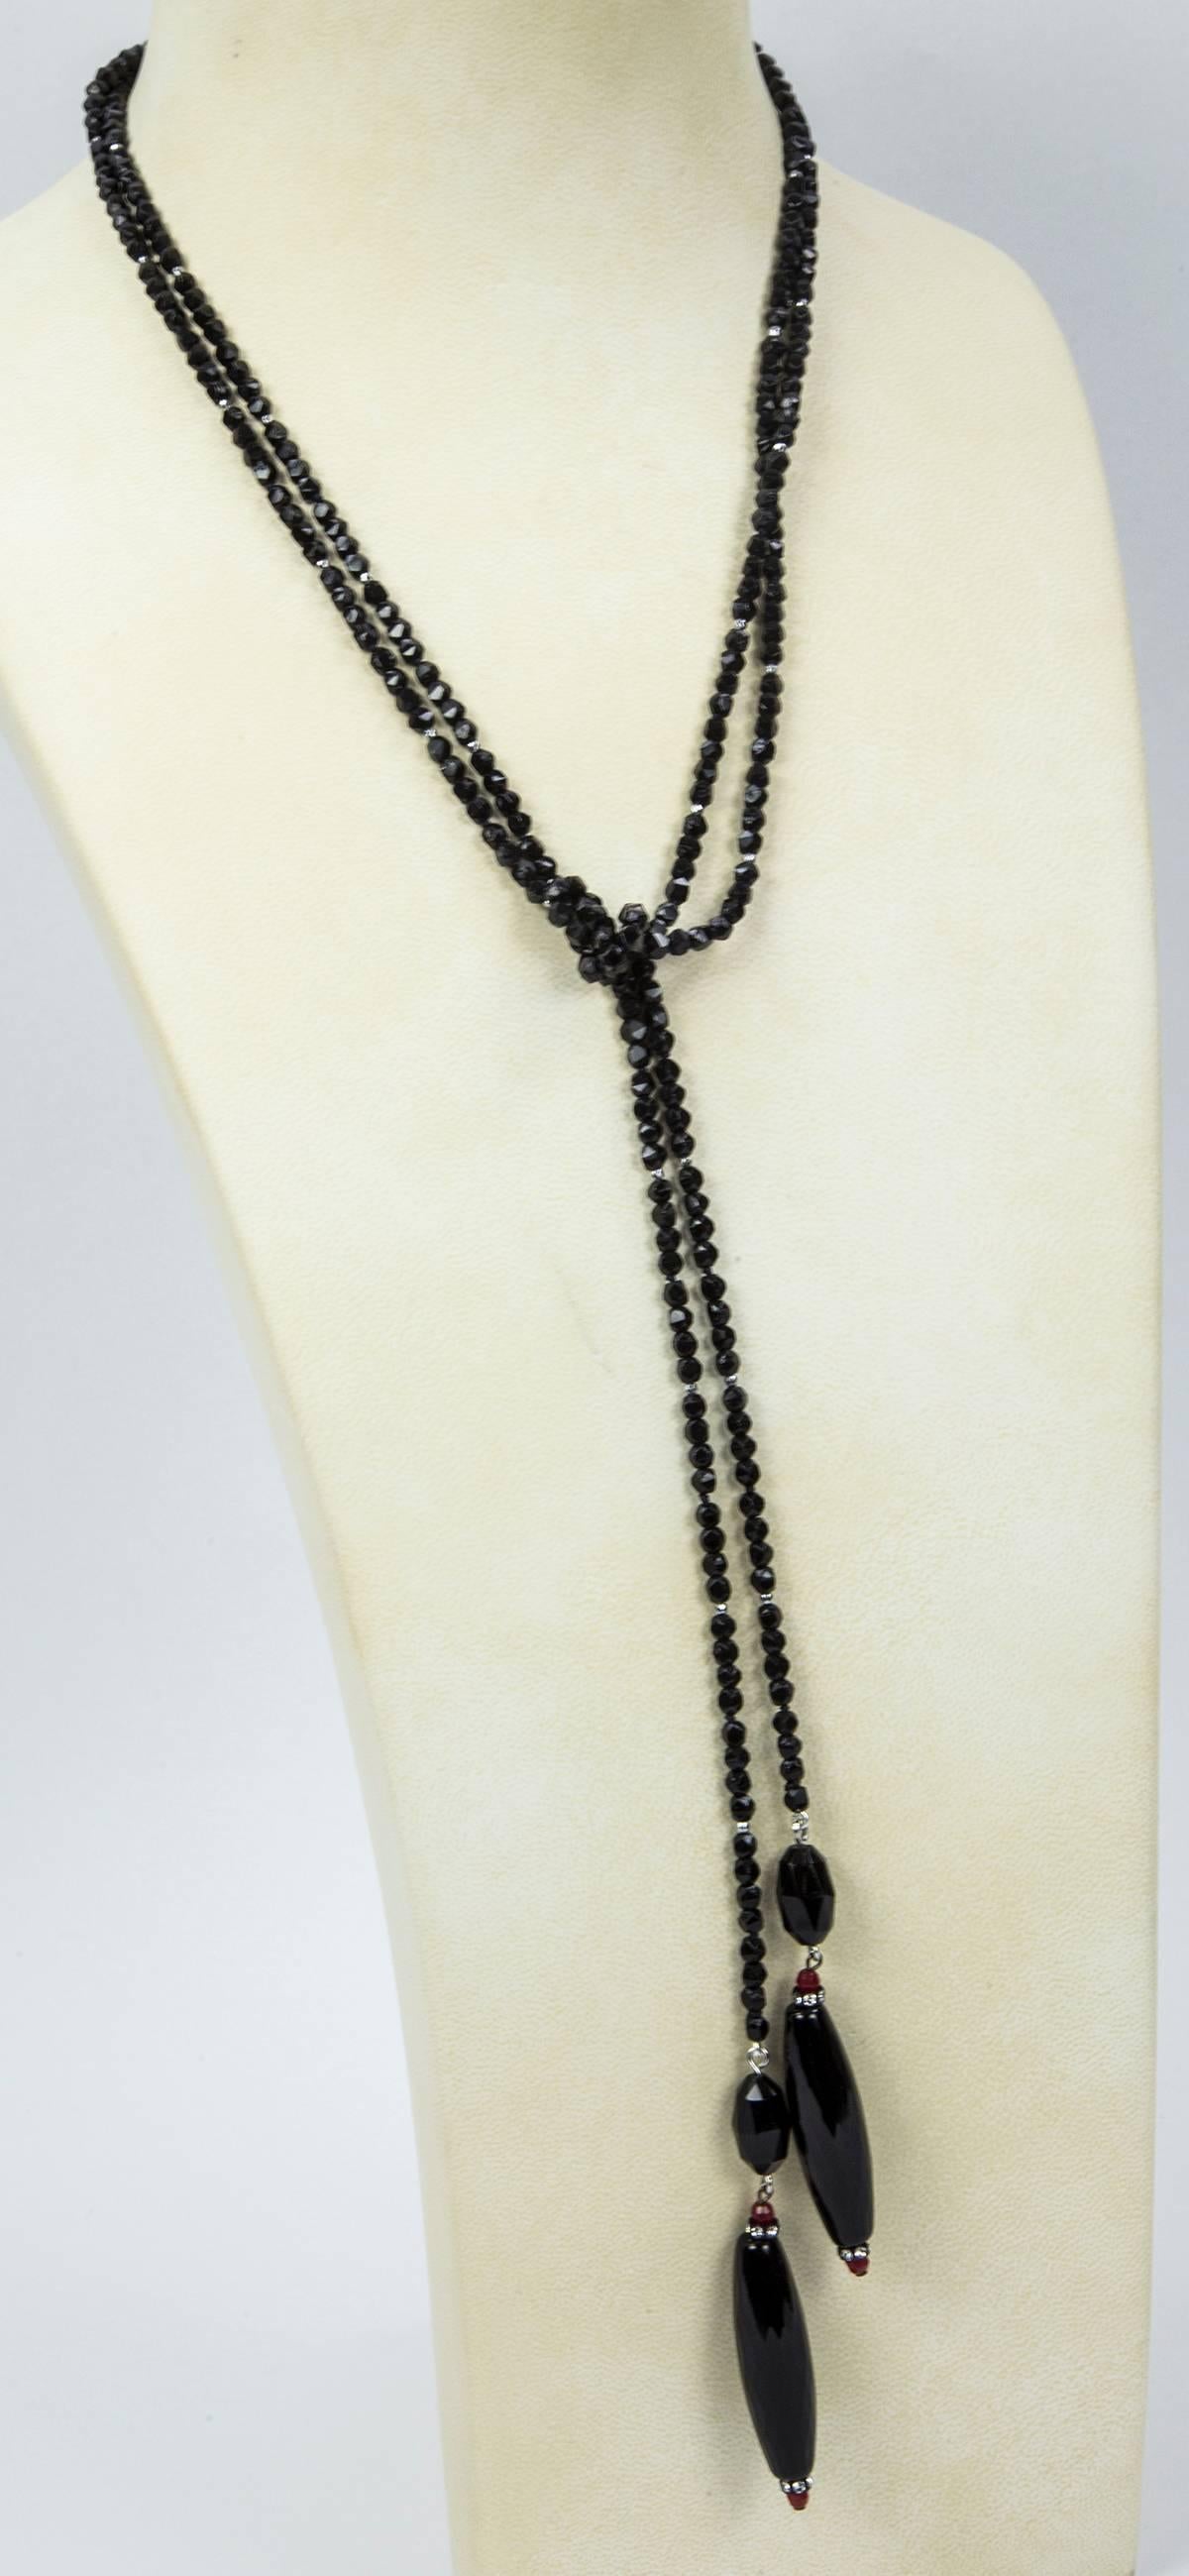 Soft faceted sheen Black Jet Lariat accented by faceted red, silver and Sparkling CZ stones, suspending two large faceted elongated teardrop shaped Jet glass beads, each measuring approx. 2” in length; approx. length of necklace: 65”. So